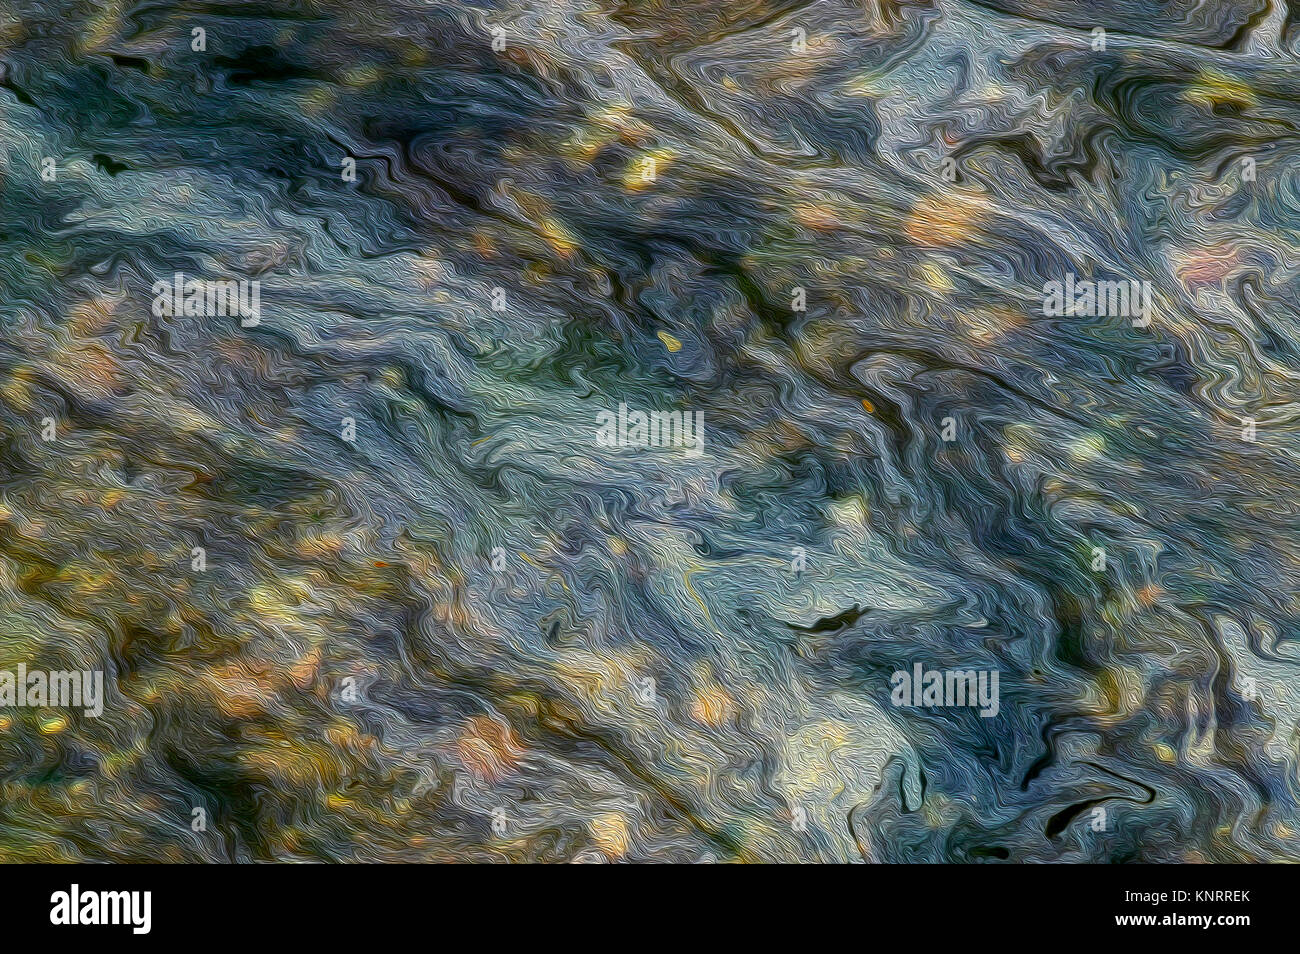 Abstract Image of Diesel oil floating on water Stock Photo